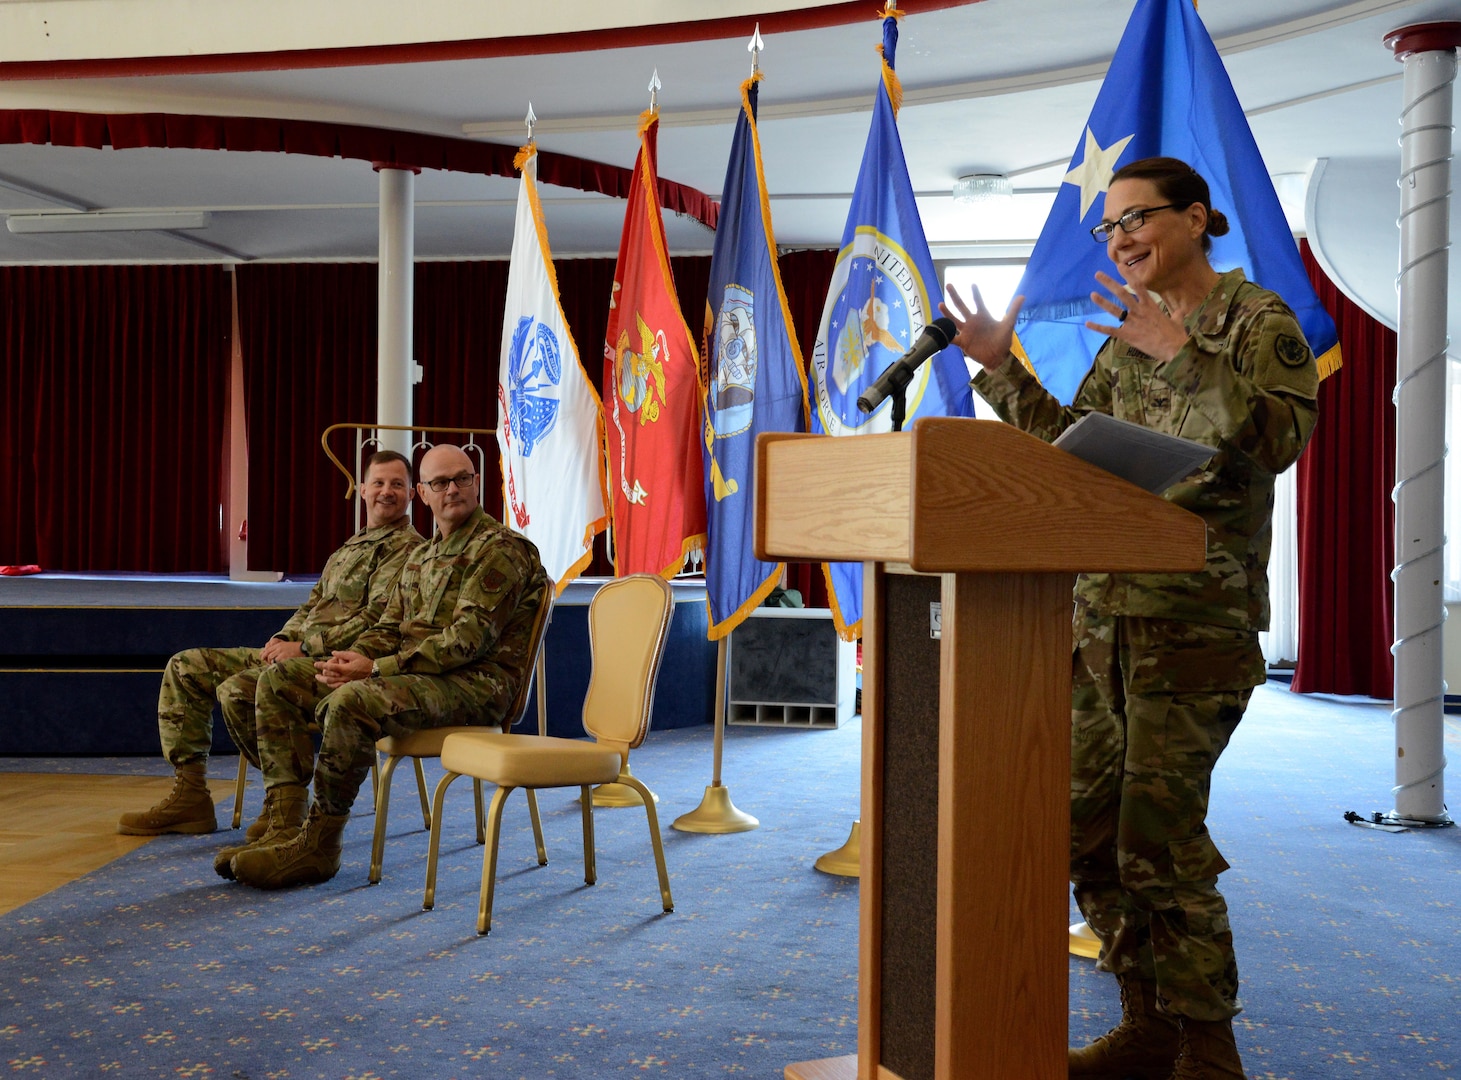 Army Col. Krista Hoffman, DLA Europe & Africa commander, speaks during a change of command ceremony June 26 in Kaiserslautern, Germany.